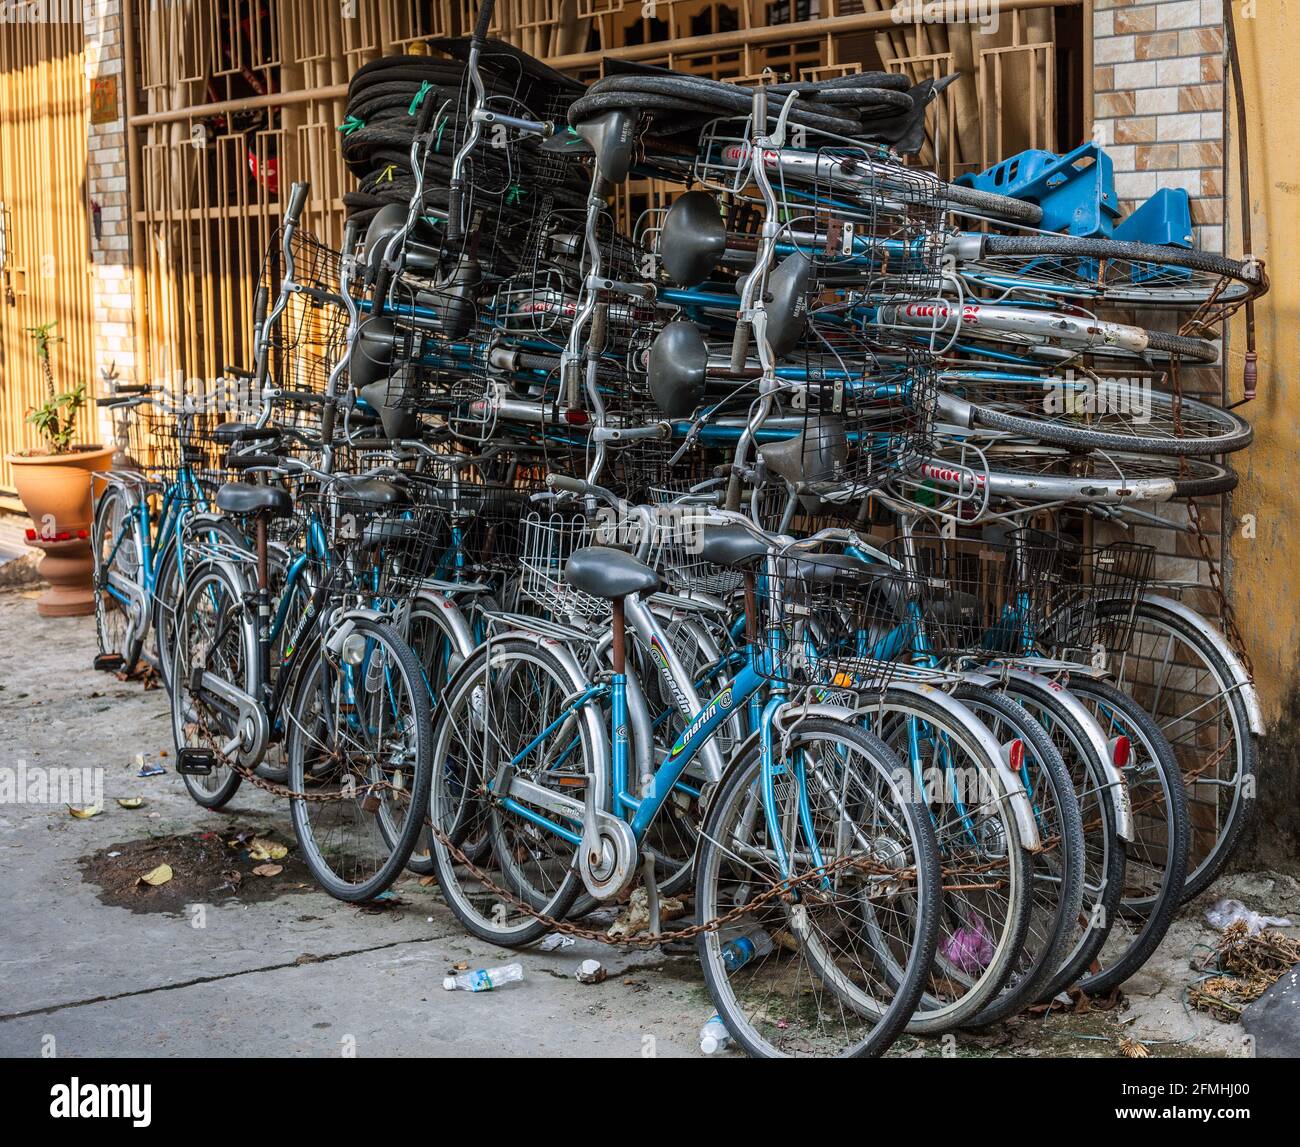 Vietnamese bicycles piled high in back street of Hoi An, Vietnam Stock Photo